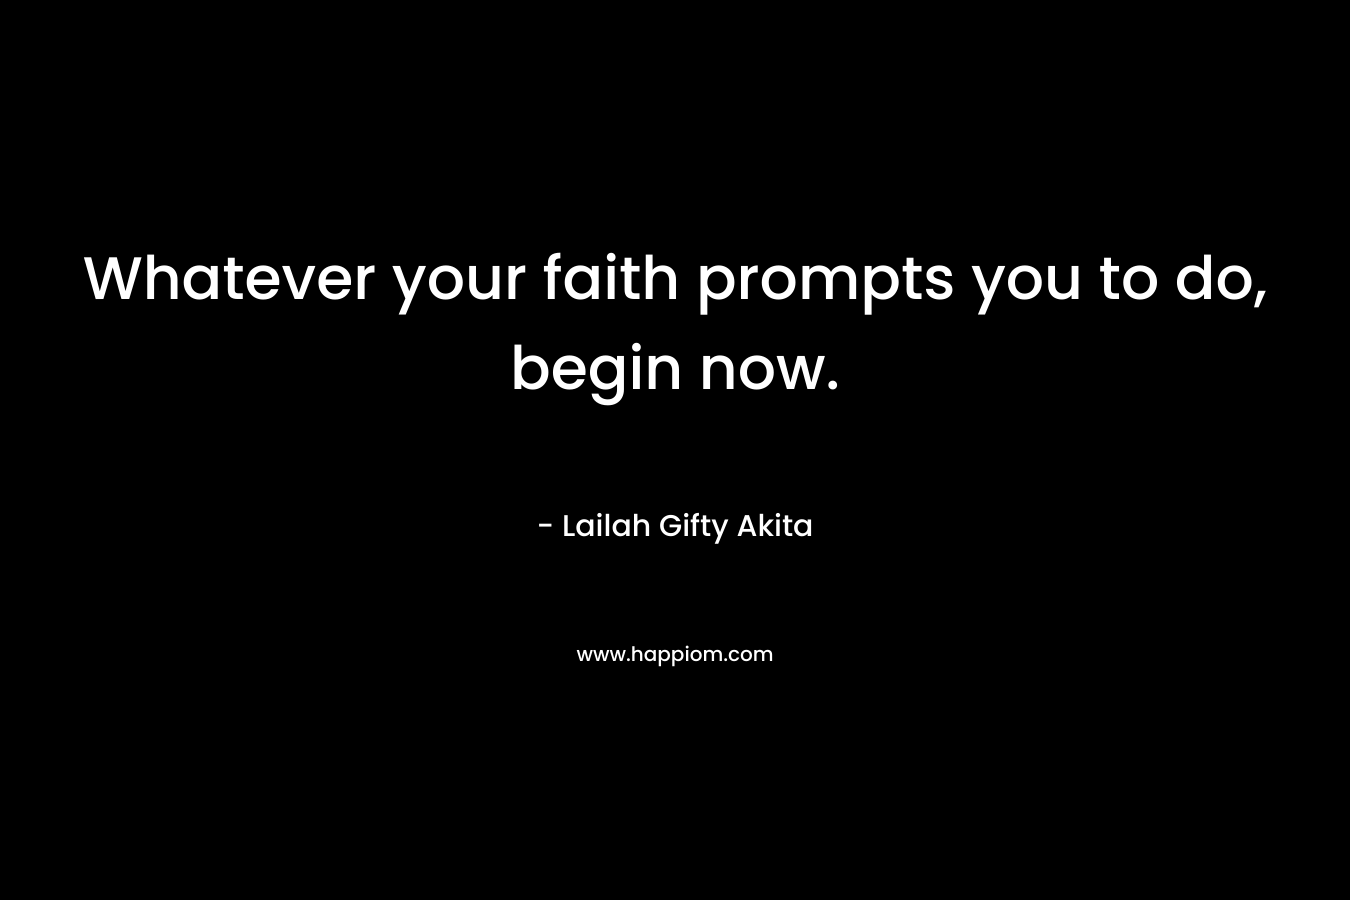 Whatever your faith prompts you to do, begin now.